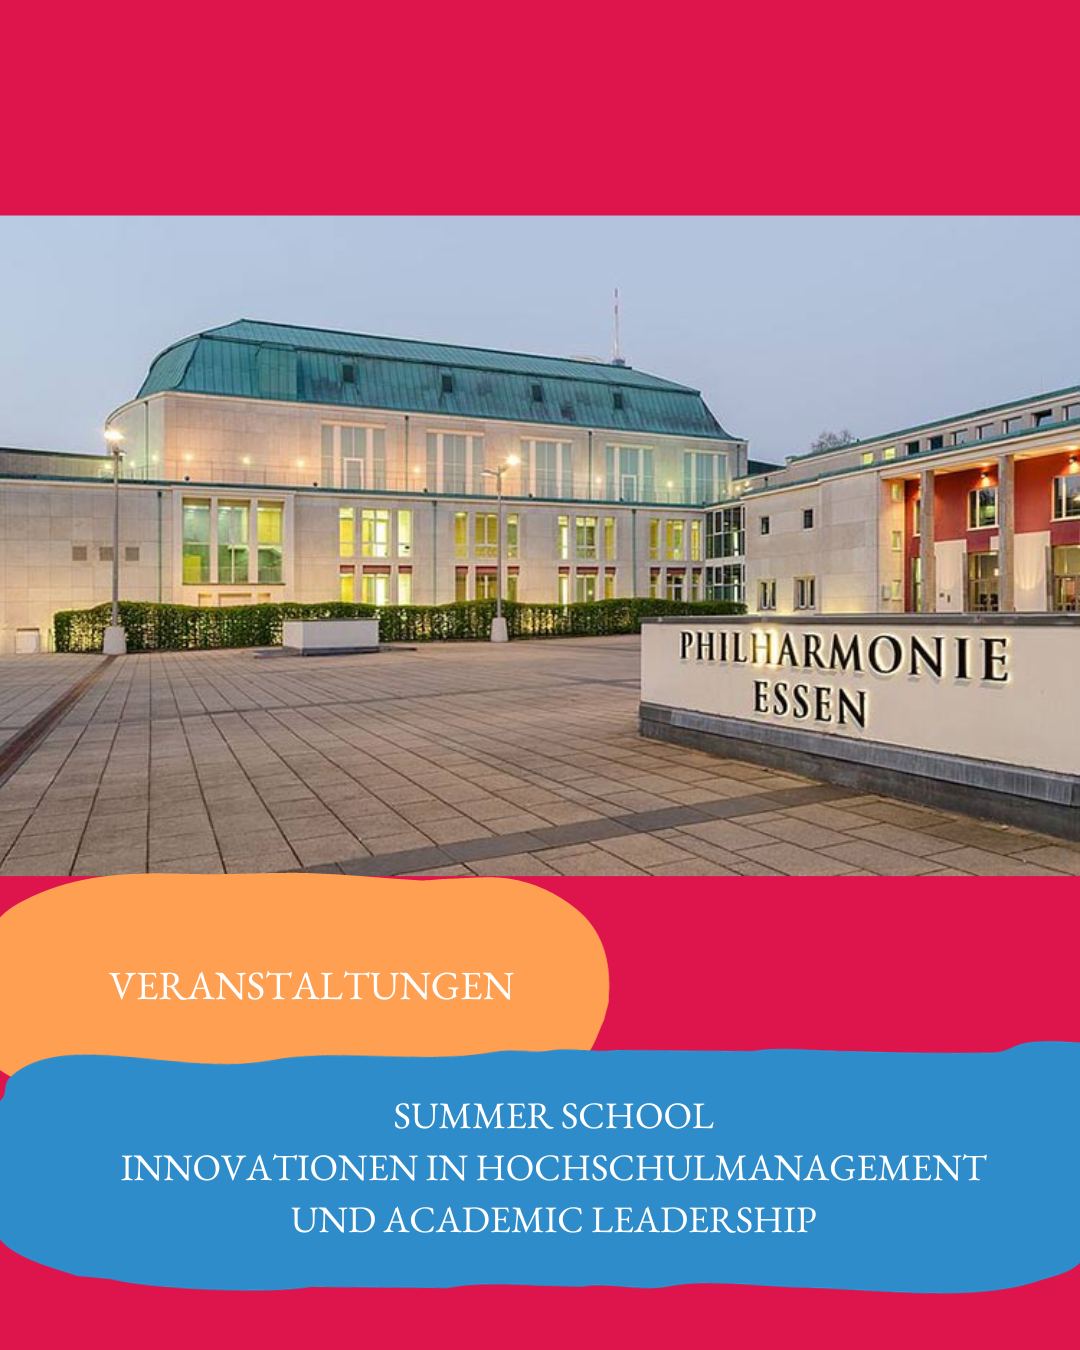 You are currently viewing Summer School: Innovationen in Hochschulmanagement und Academic Leadership